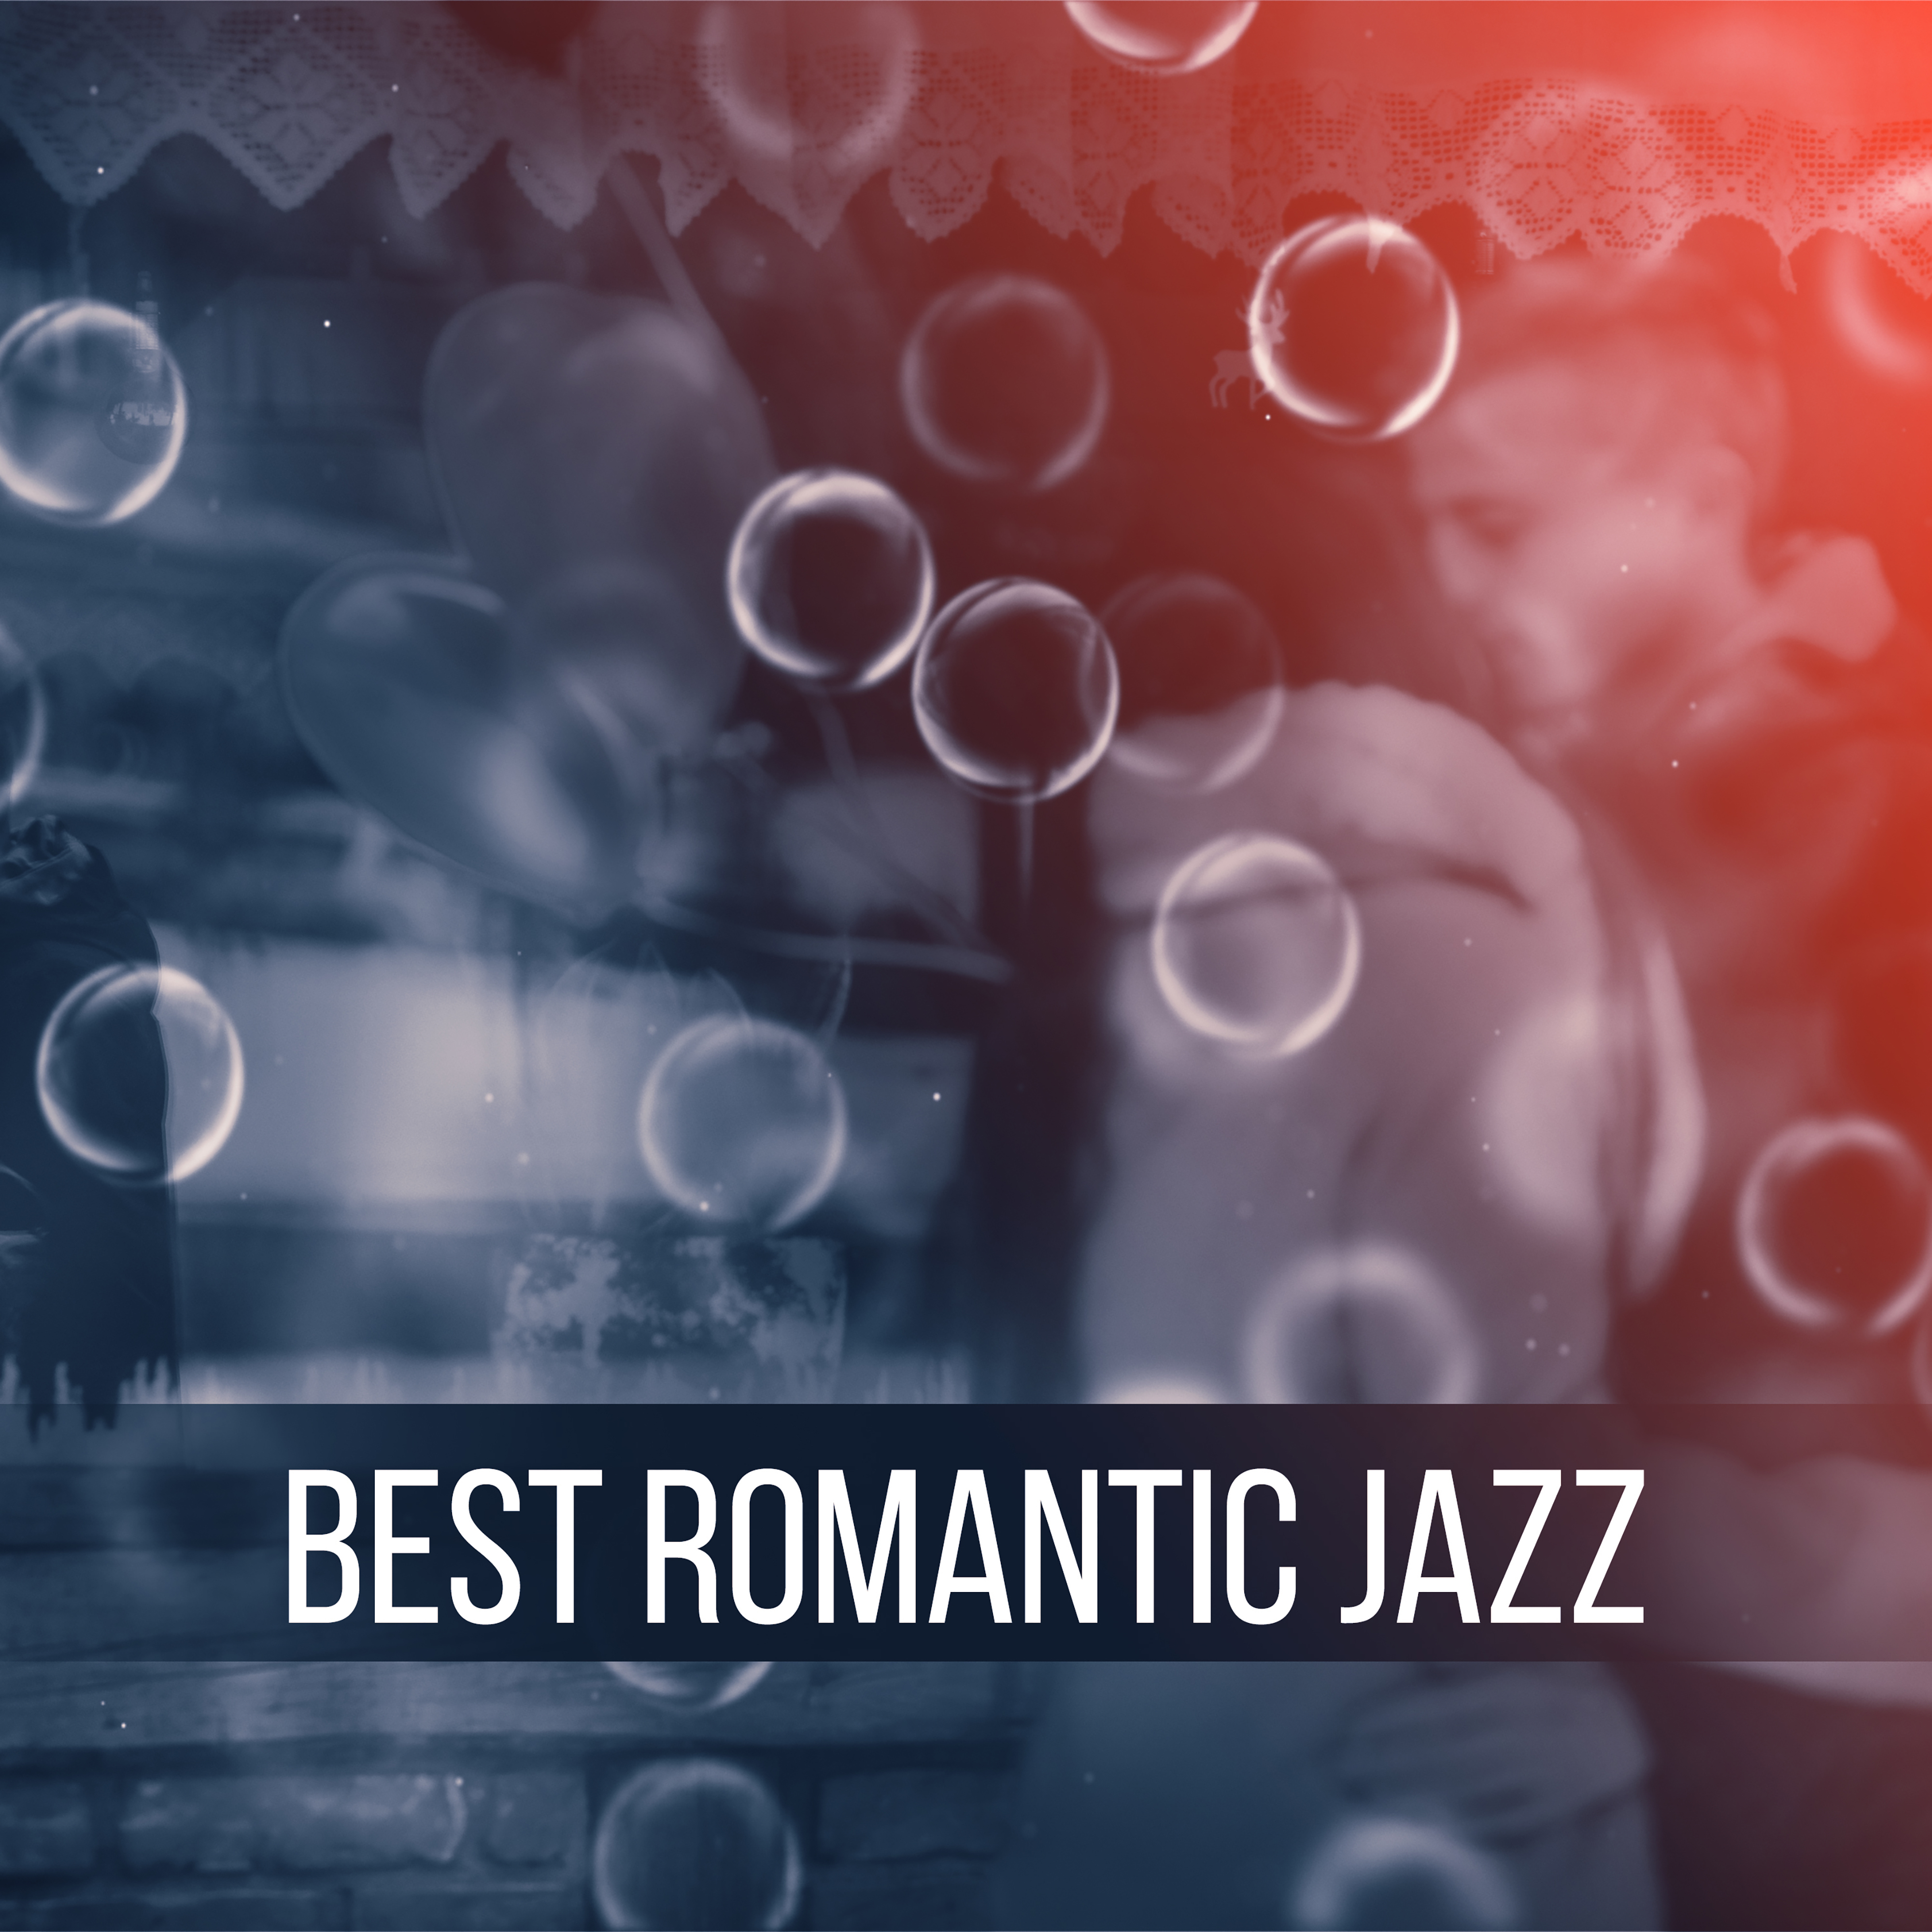 Best Romantic Jazz – Dinner by Candlelight, Mellow Jazz, Romantic Evening with Two, **** Piano Music, Soothing Music for Lovers